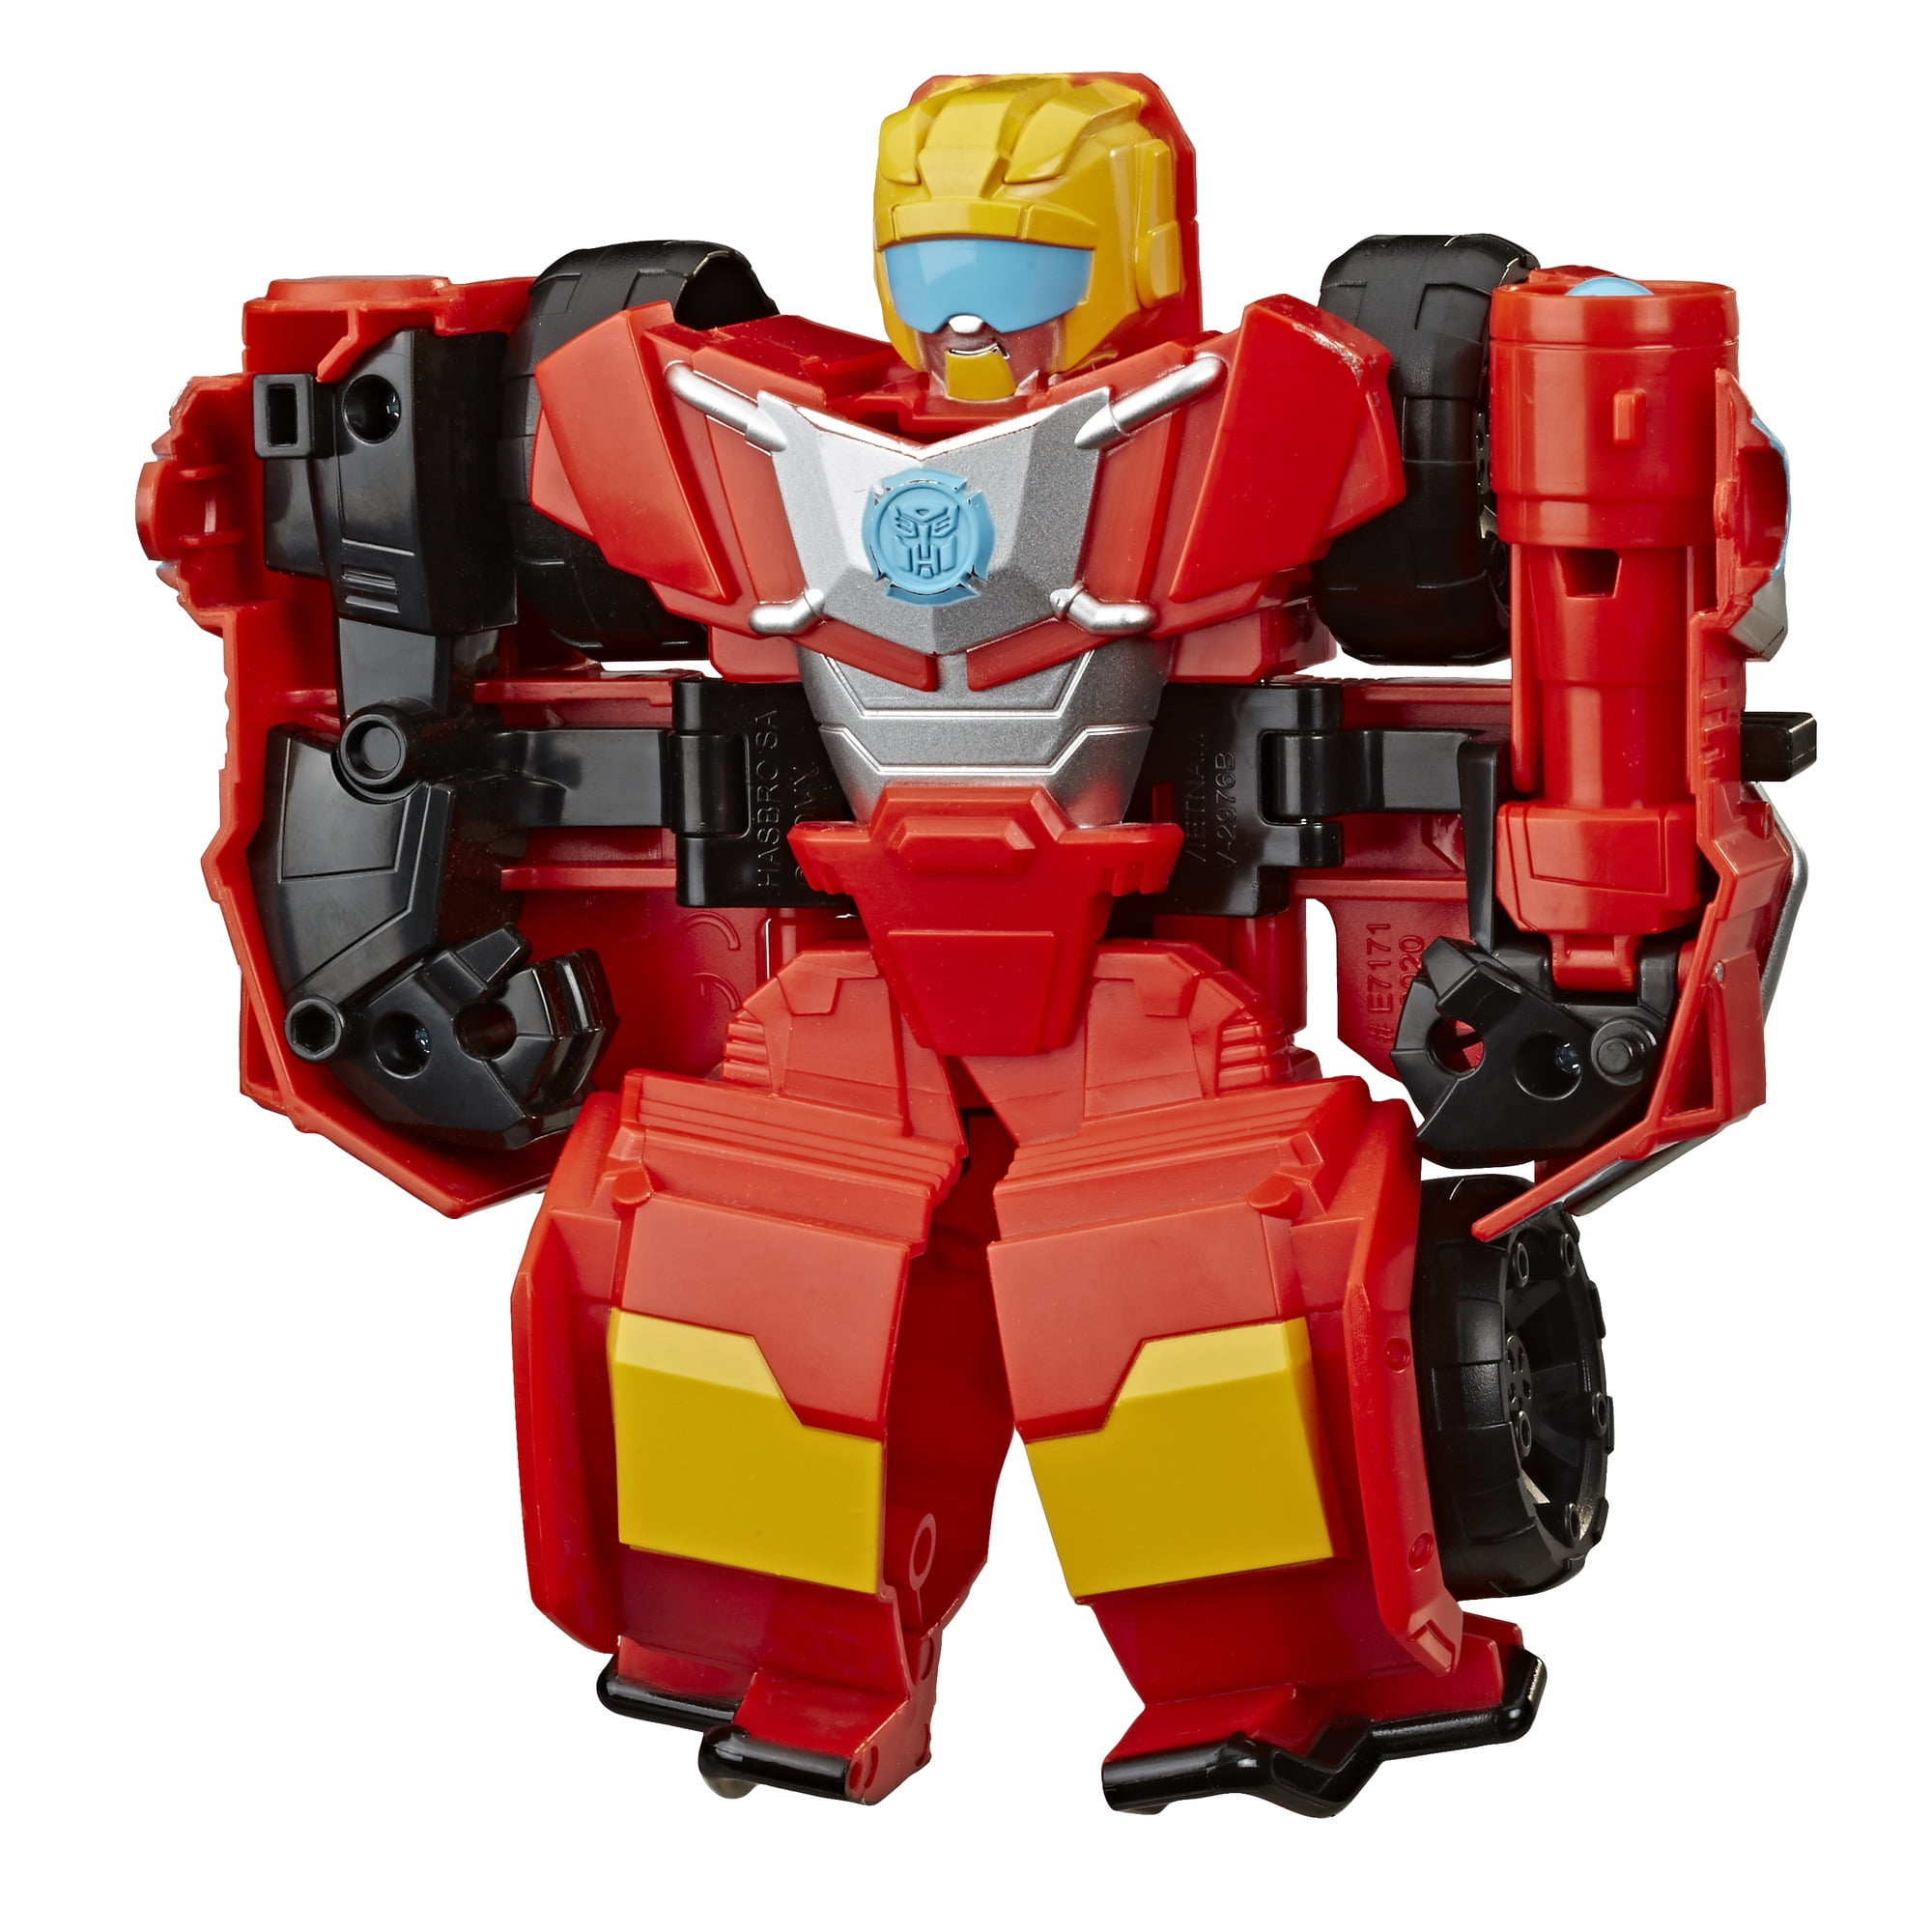 TRANSFORMERS RESCUE BOTS Playskool Heroes Academy Hot Shot Action Figure 